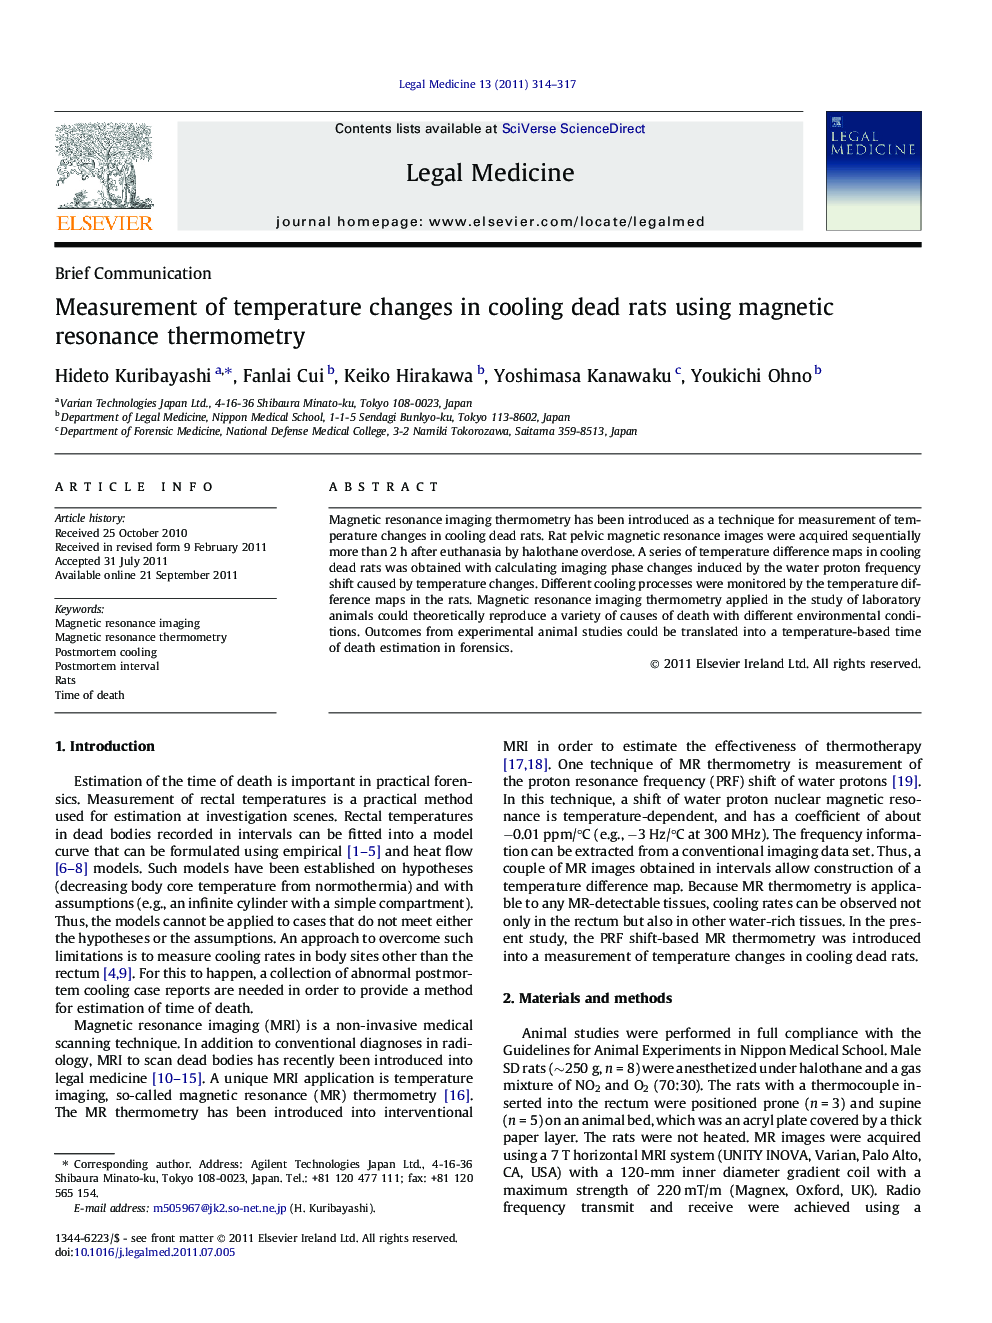 Measurement of temperature changes in cooling dead rats using magnetic resonance thermometry